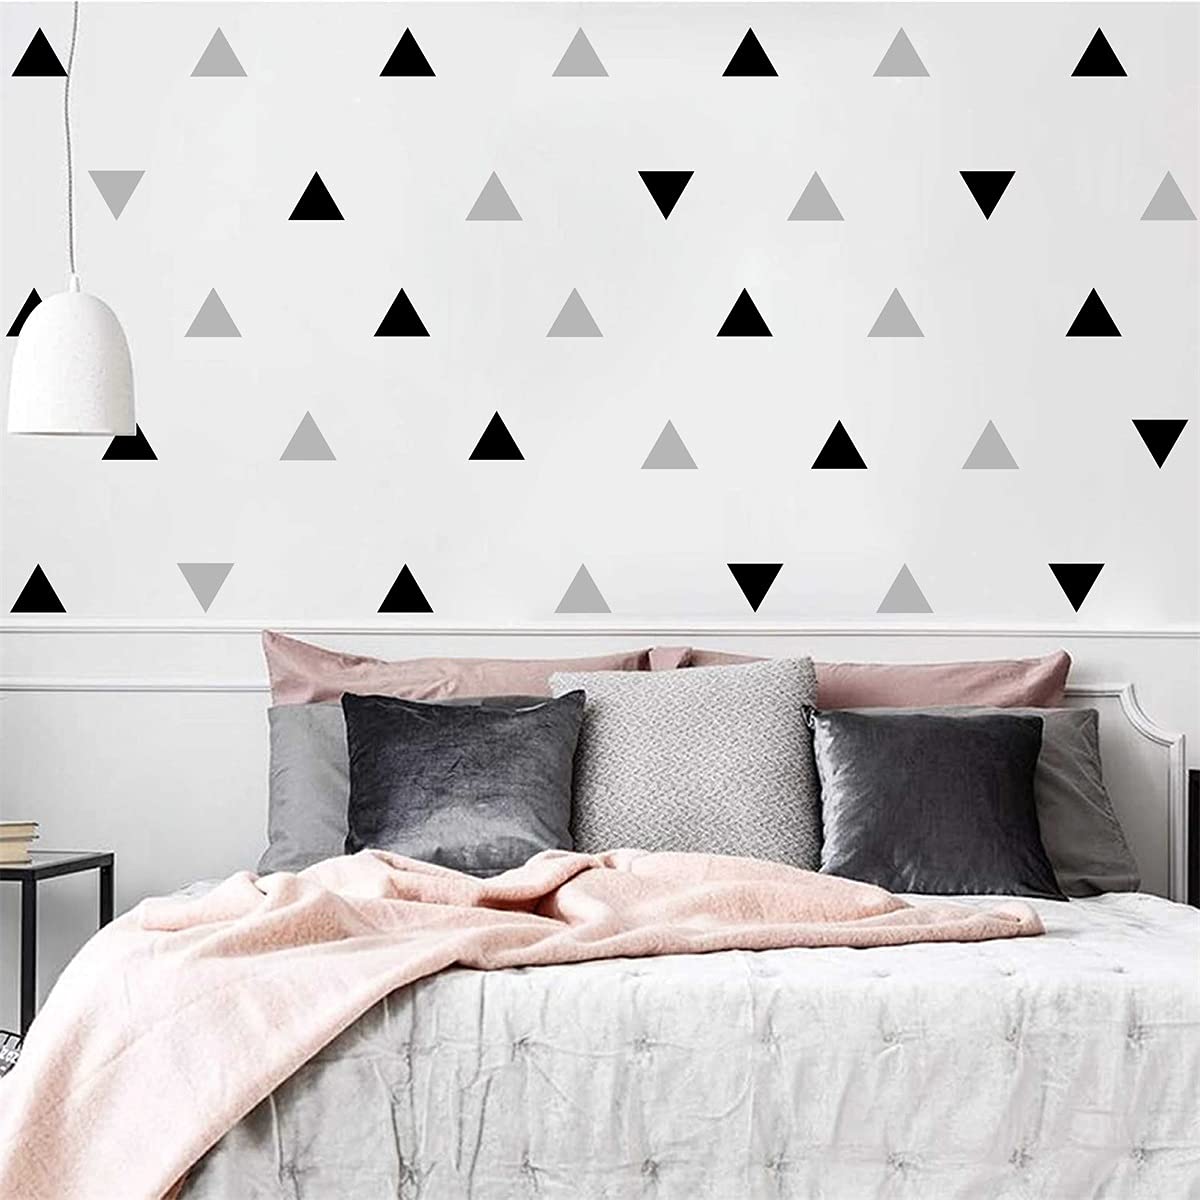 Triangle Wall Stickers Vinyl 160Pcs Black and Grey Wall Decals Peel and Stick Modern Wall Stickers Geometric Wall Decal Kids Wall Stickers Neutral Wall Stickers for Bedroom Living Room Nursery Decor